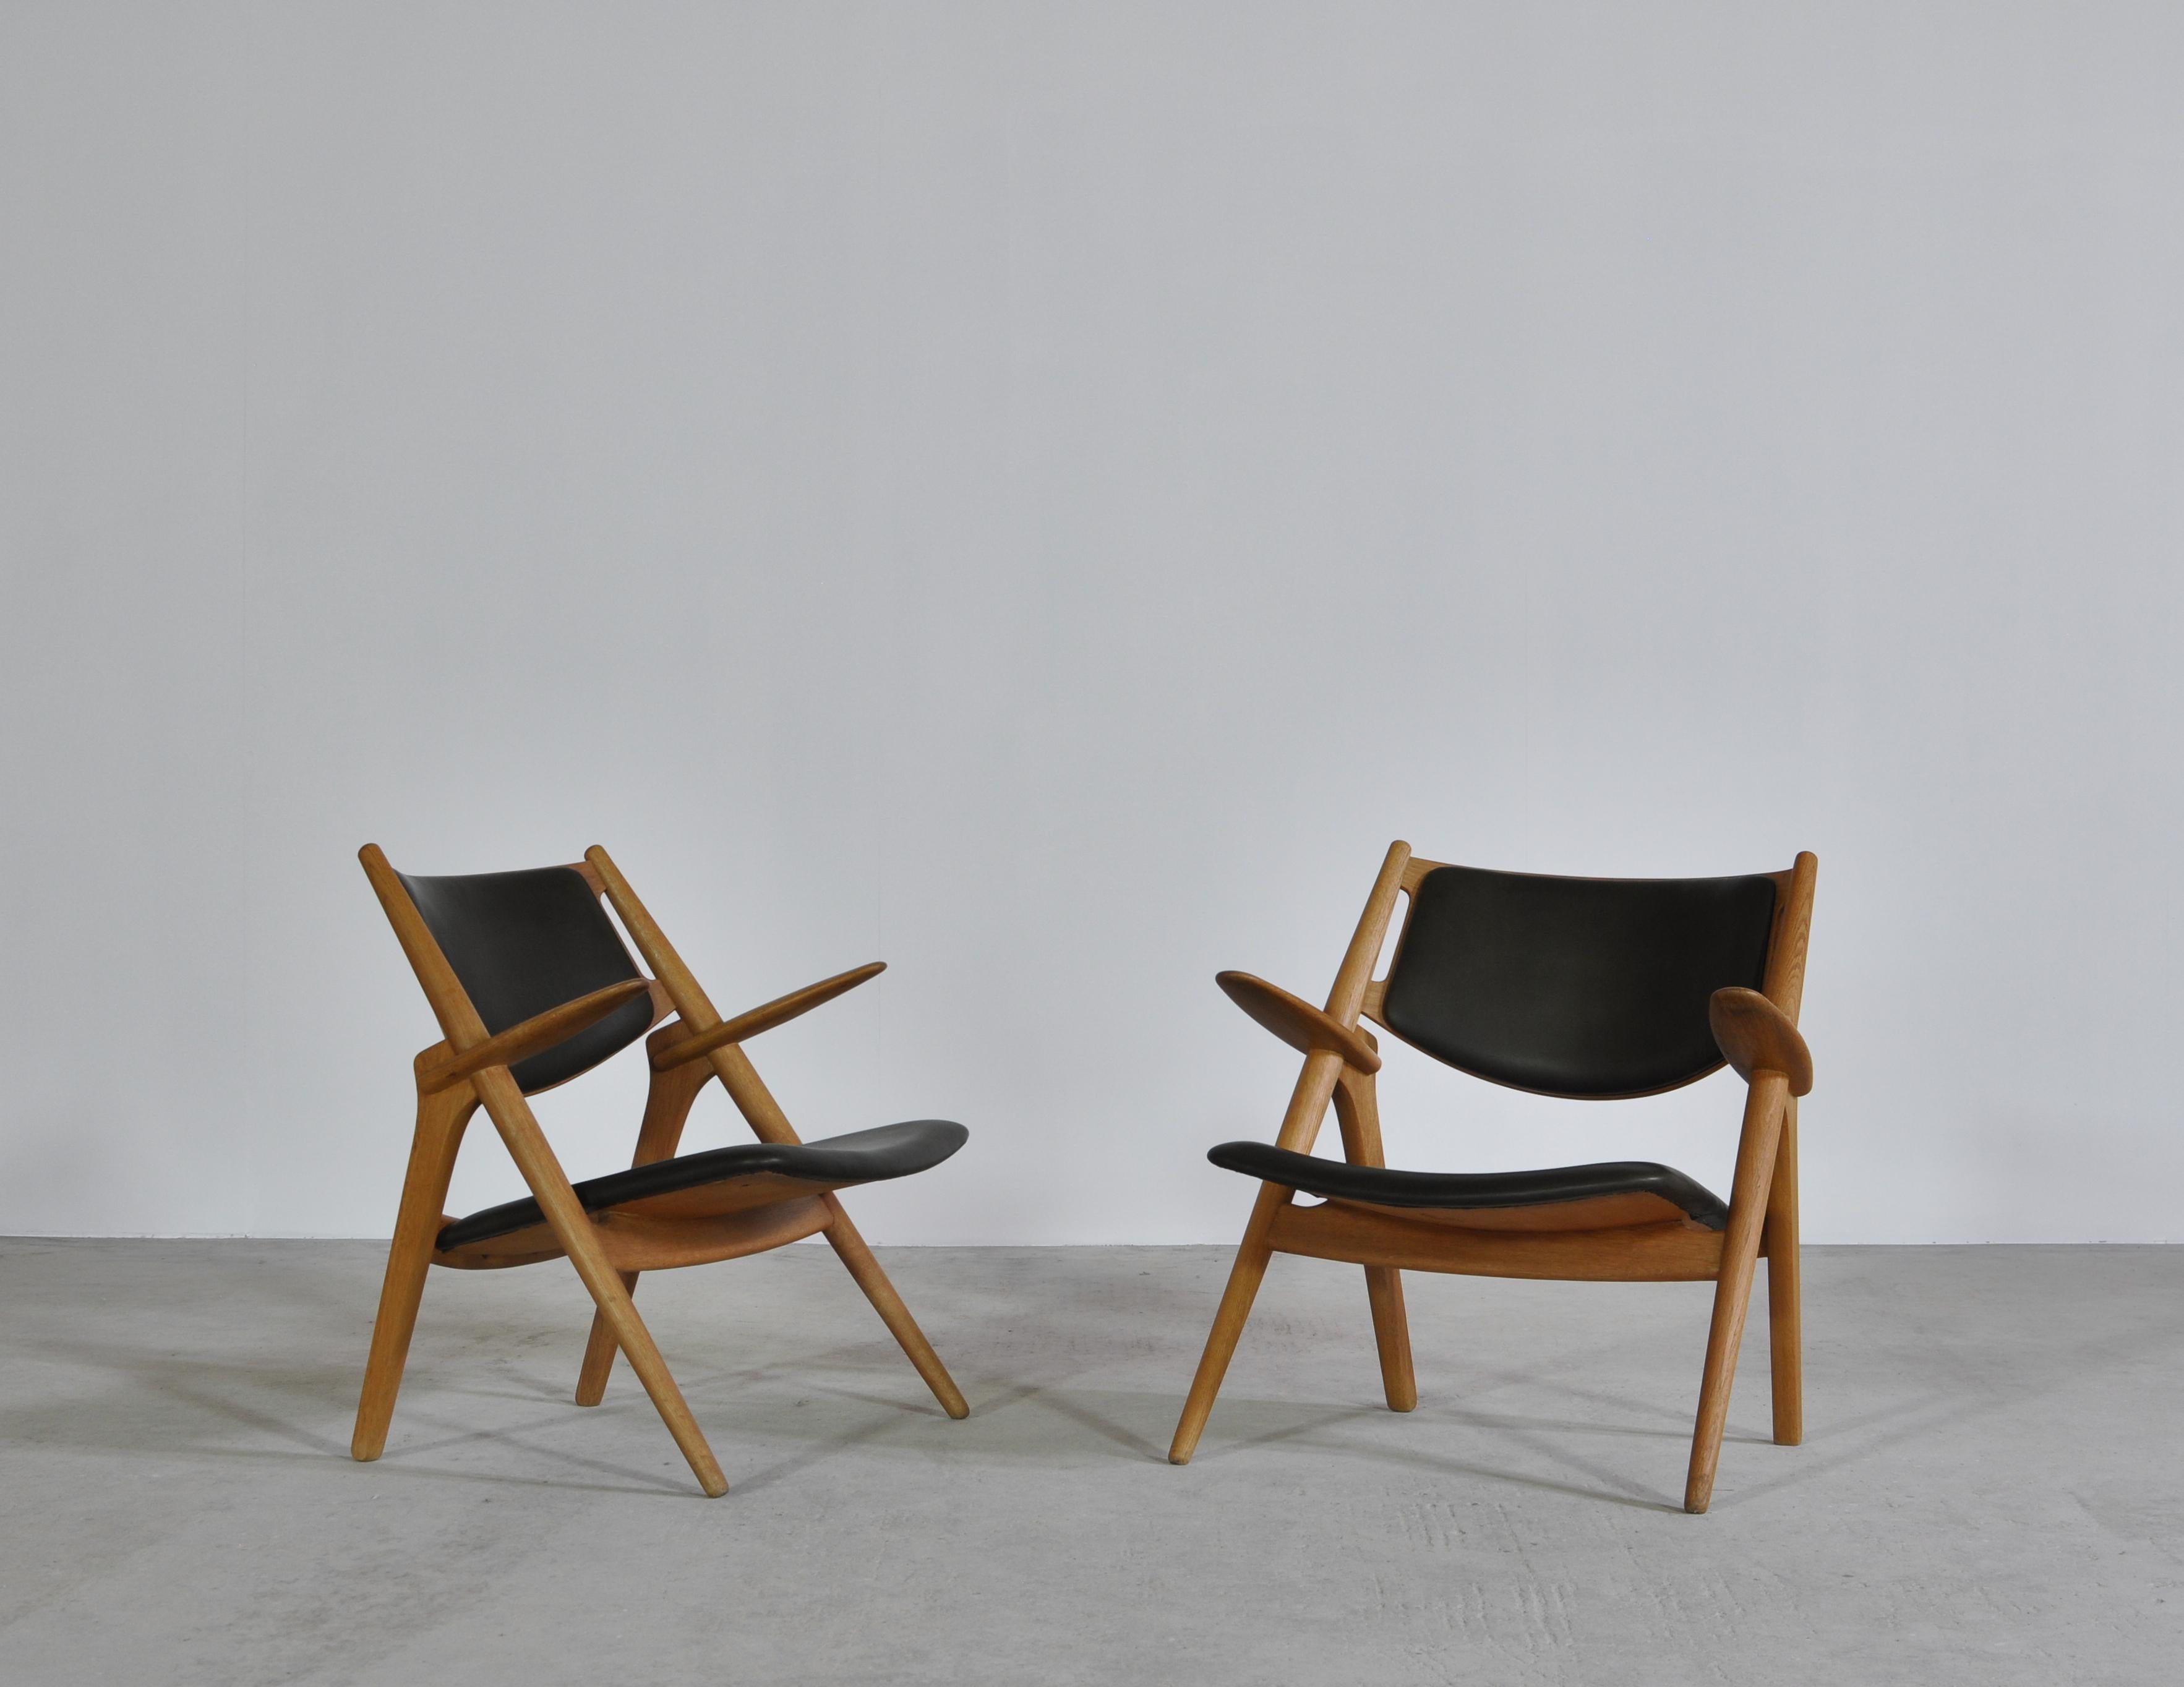 Scandinavian Modern Hans J. Wegner Lounge Chairs from the 1960s in Oak and Dark Green Leather